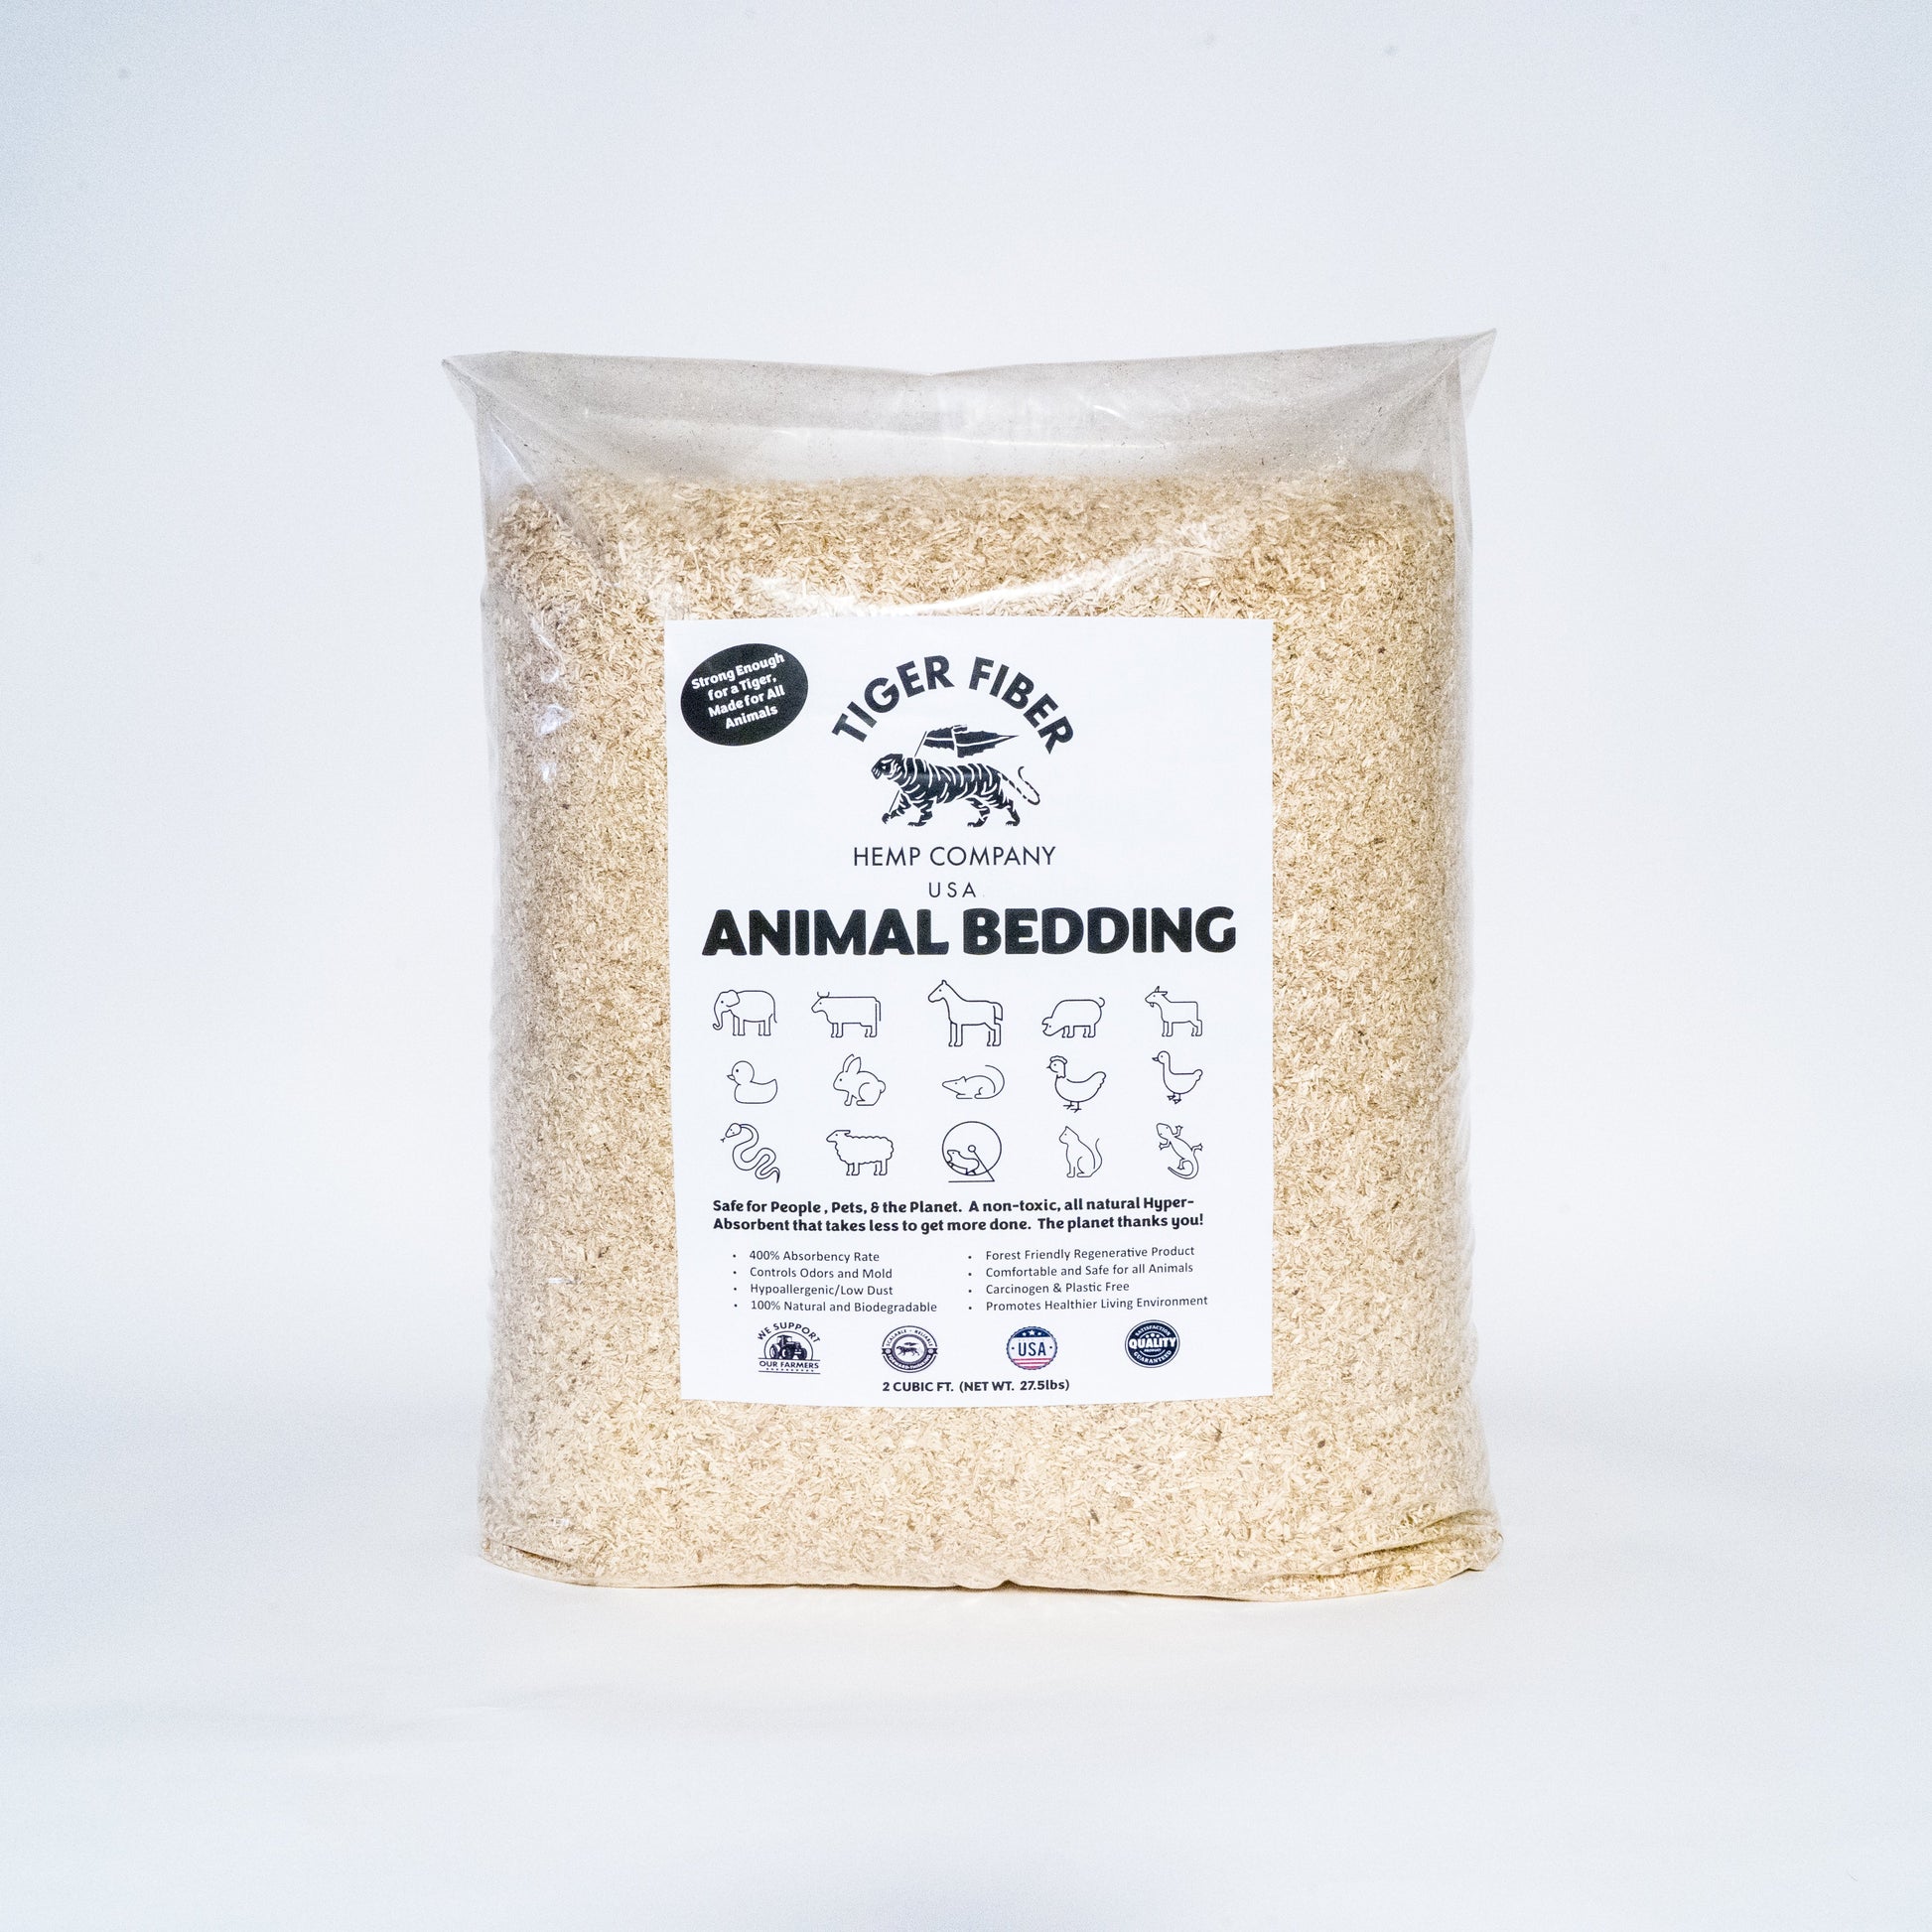 A 2.5 cubic ft bag of made in the USA animal bedding by Tiger Fiber hemp displayed over a white backdrop.